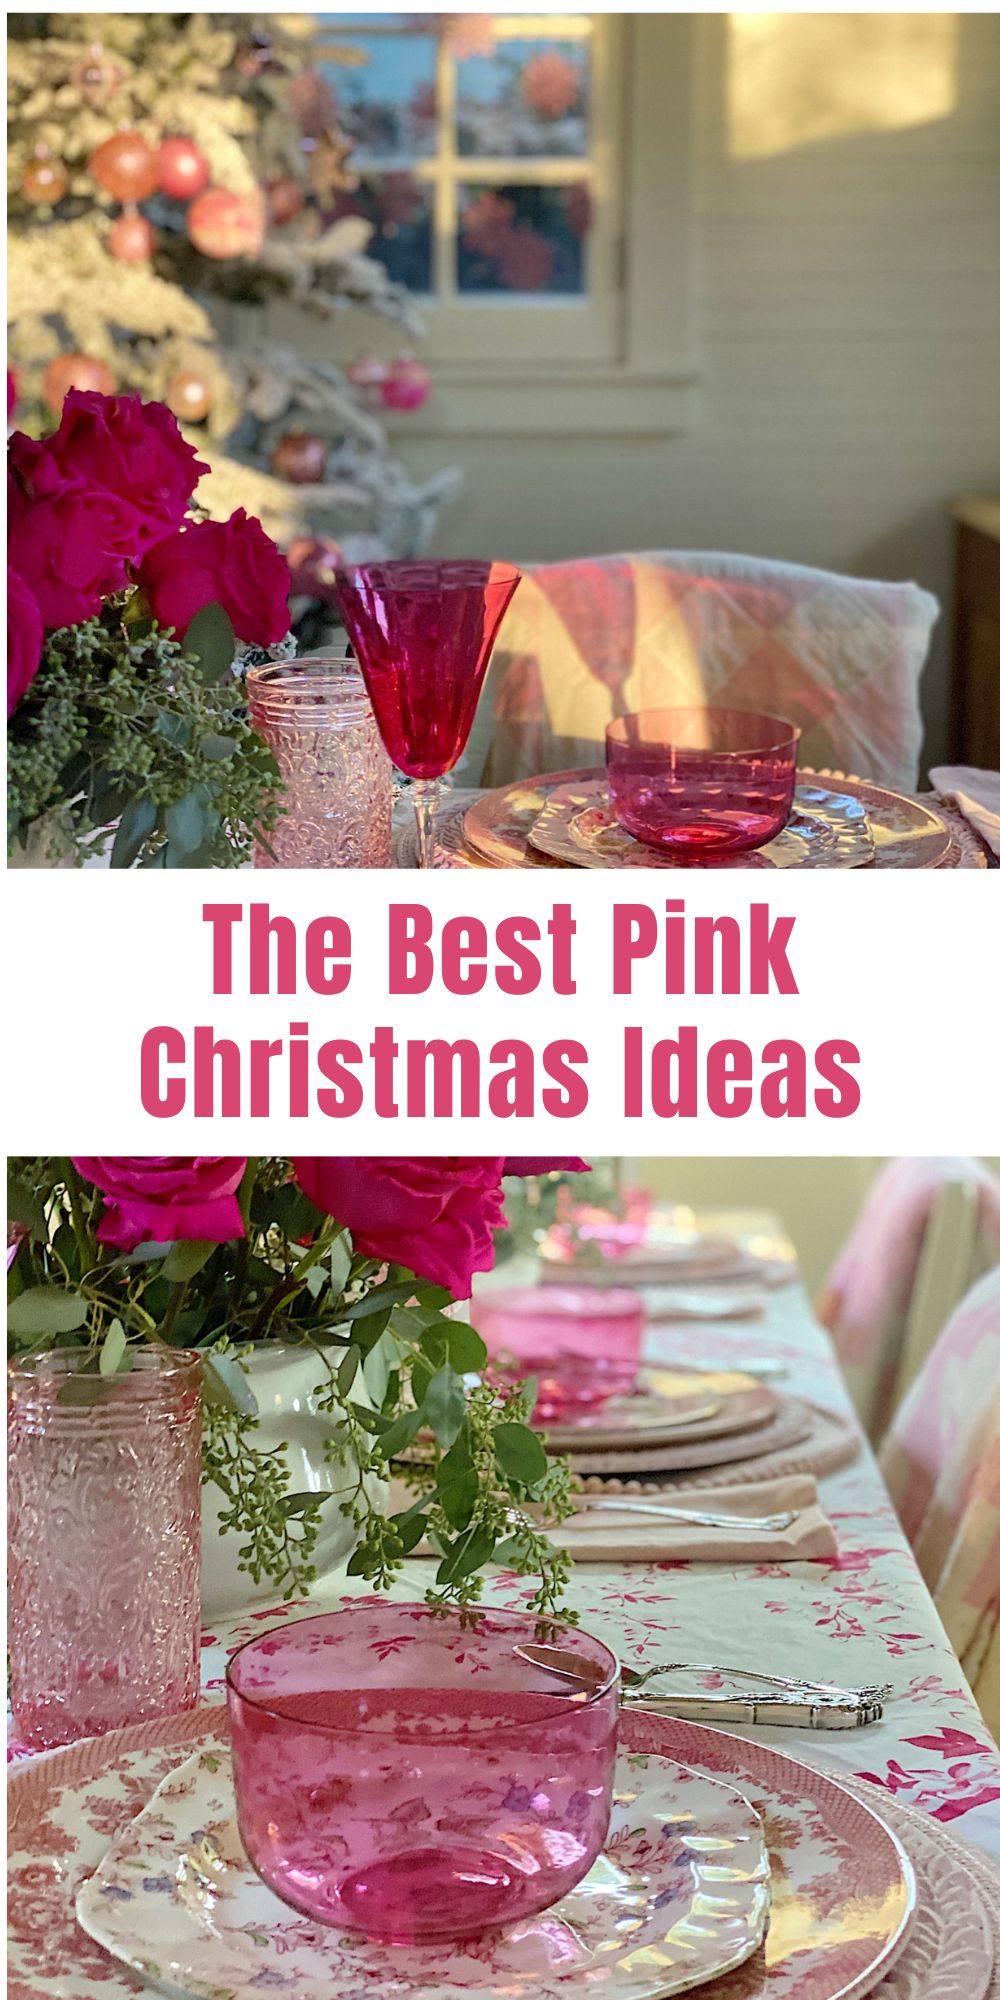 Looking for a non-traditional Christmas color? Decorating for a Pink Christmas was one of my favorite Christmas decor ideas!